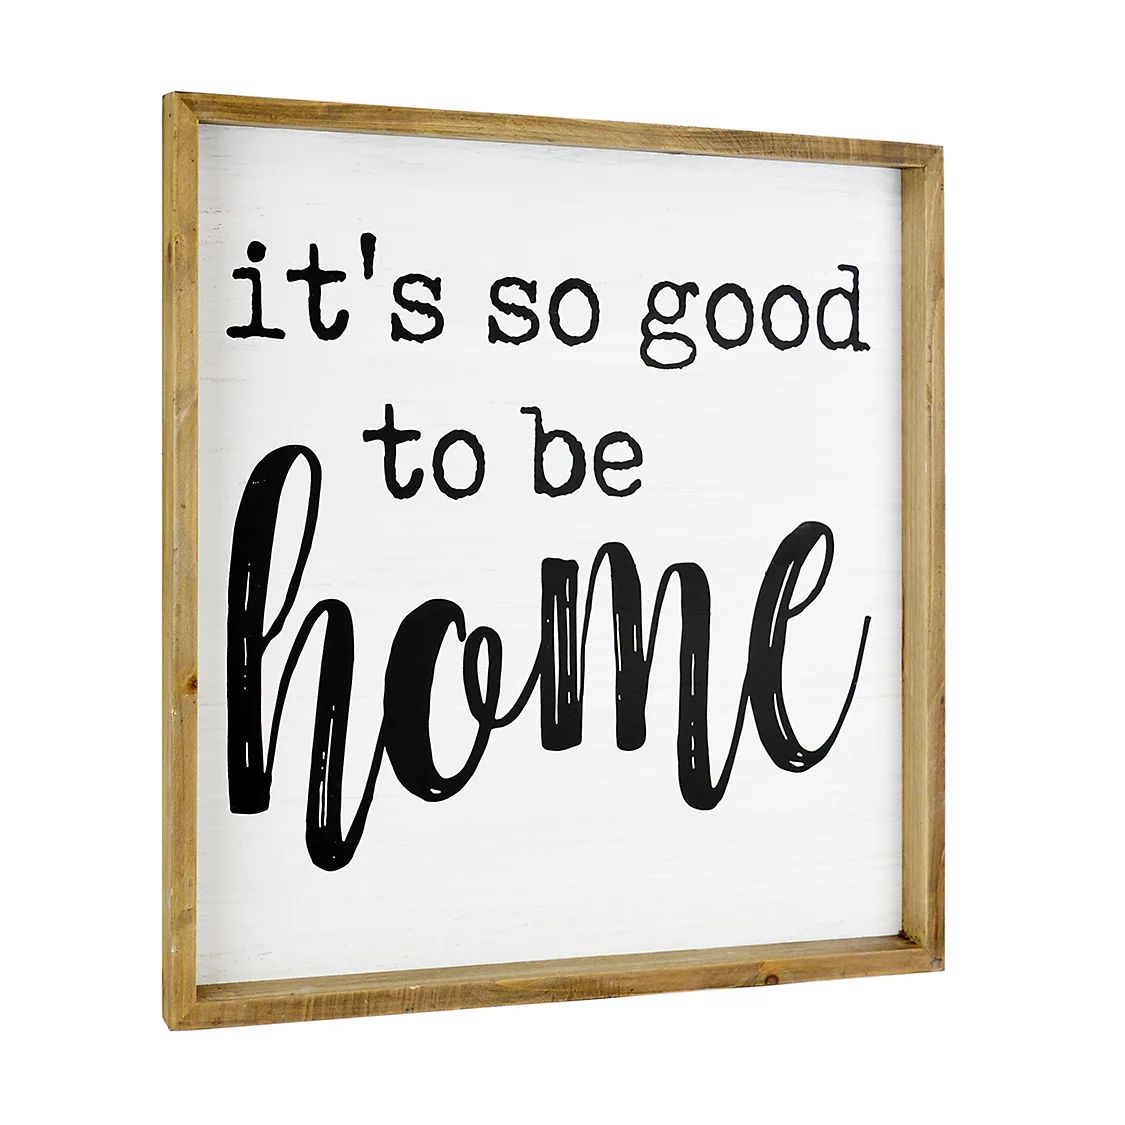 The Gallery Collection "Home" Wall Decor | Kohl's